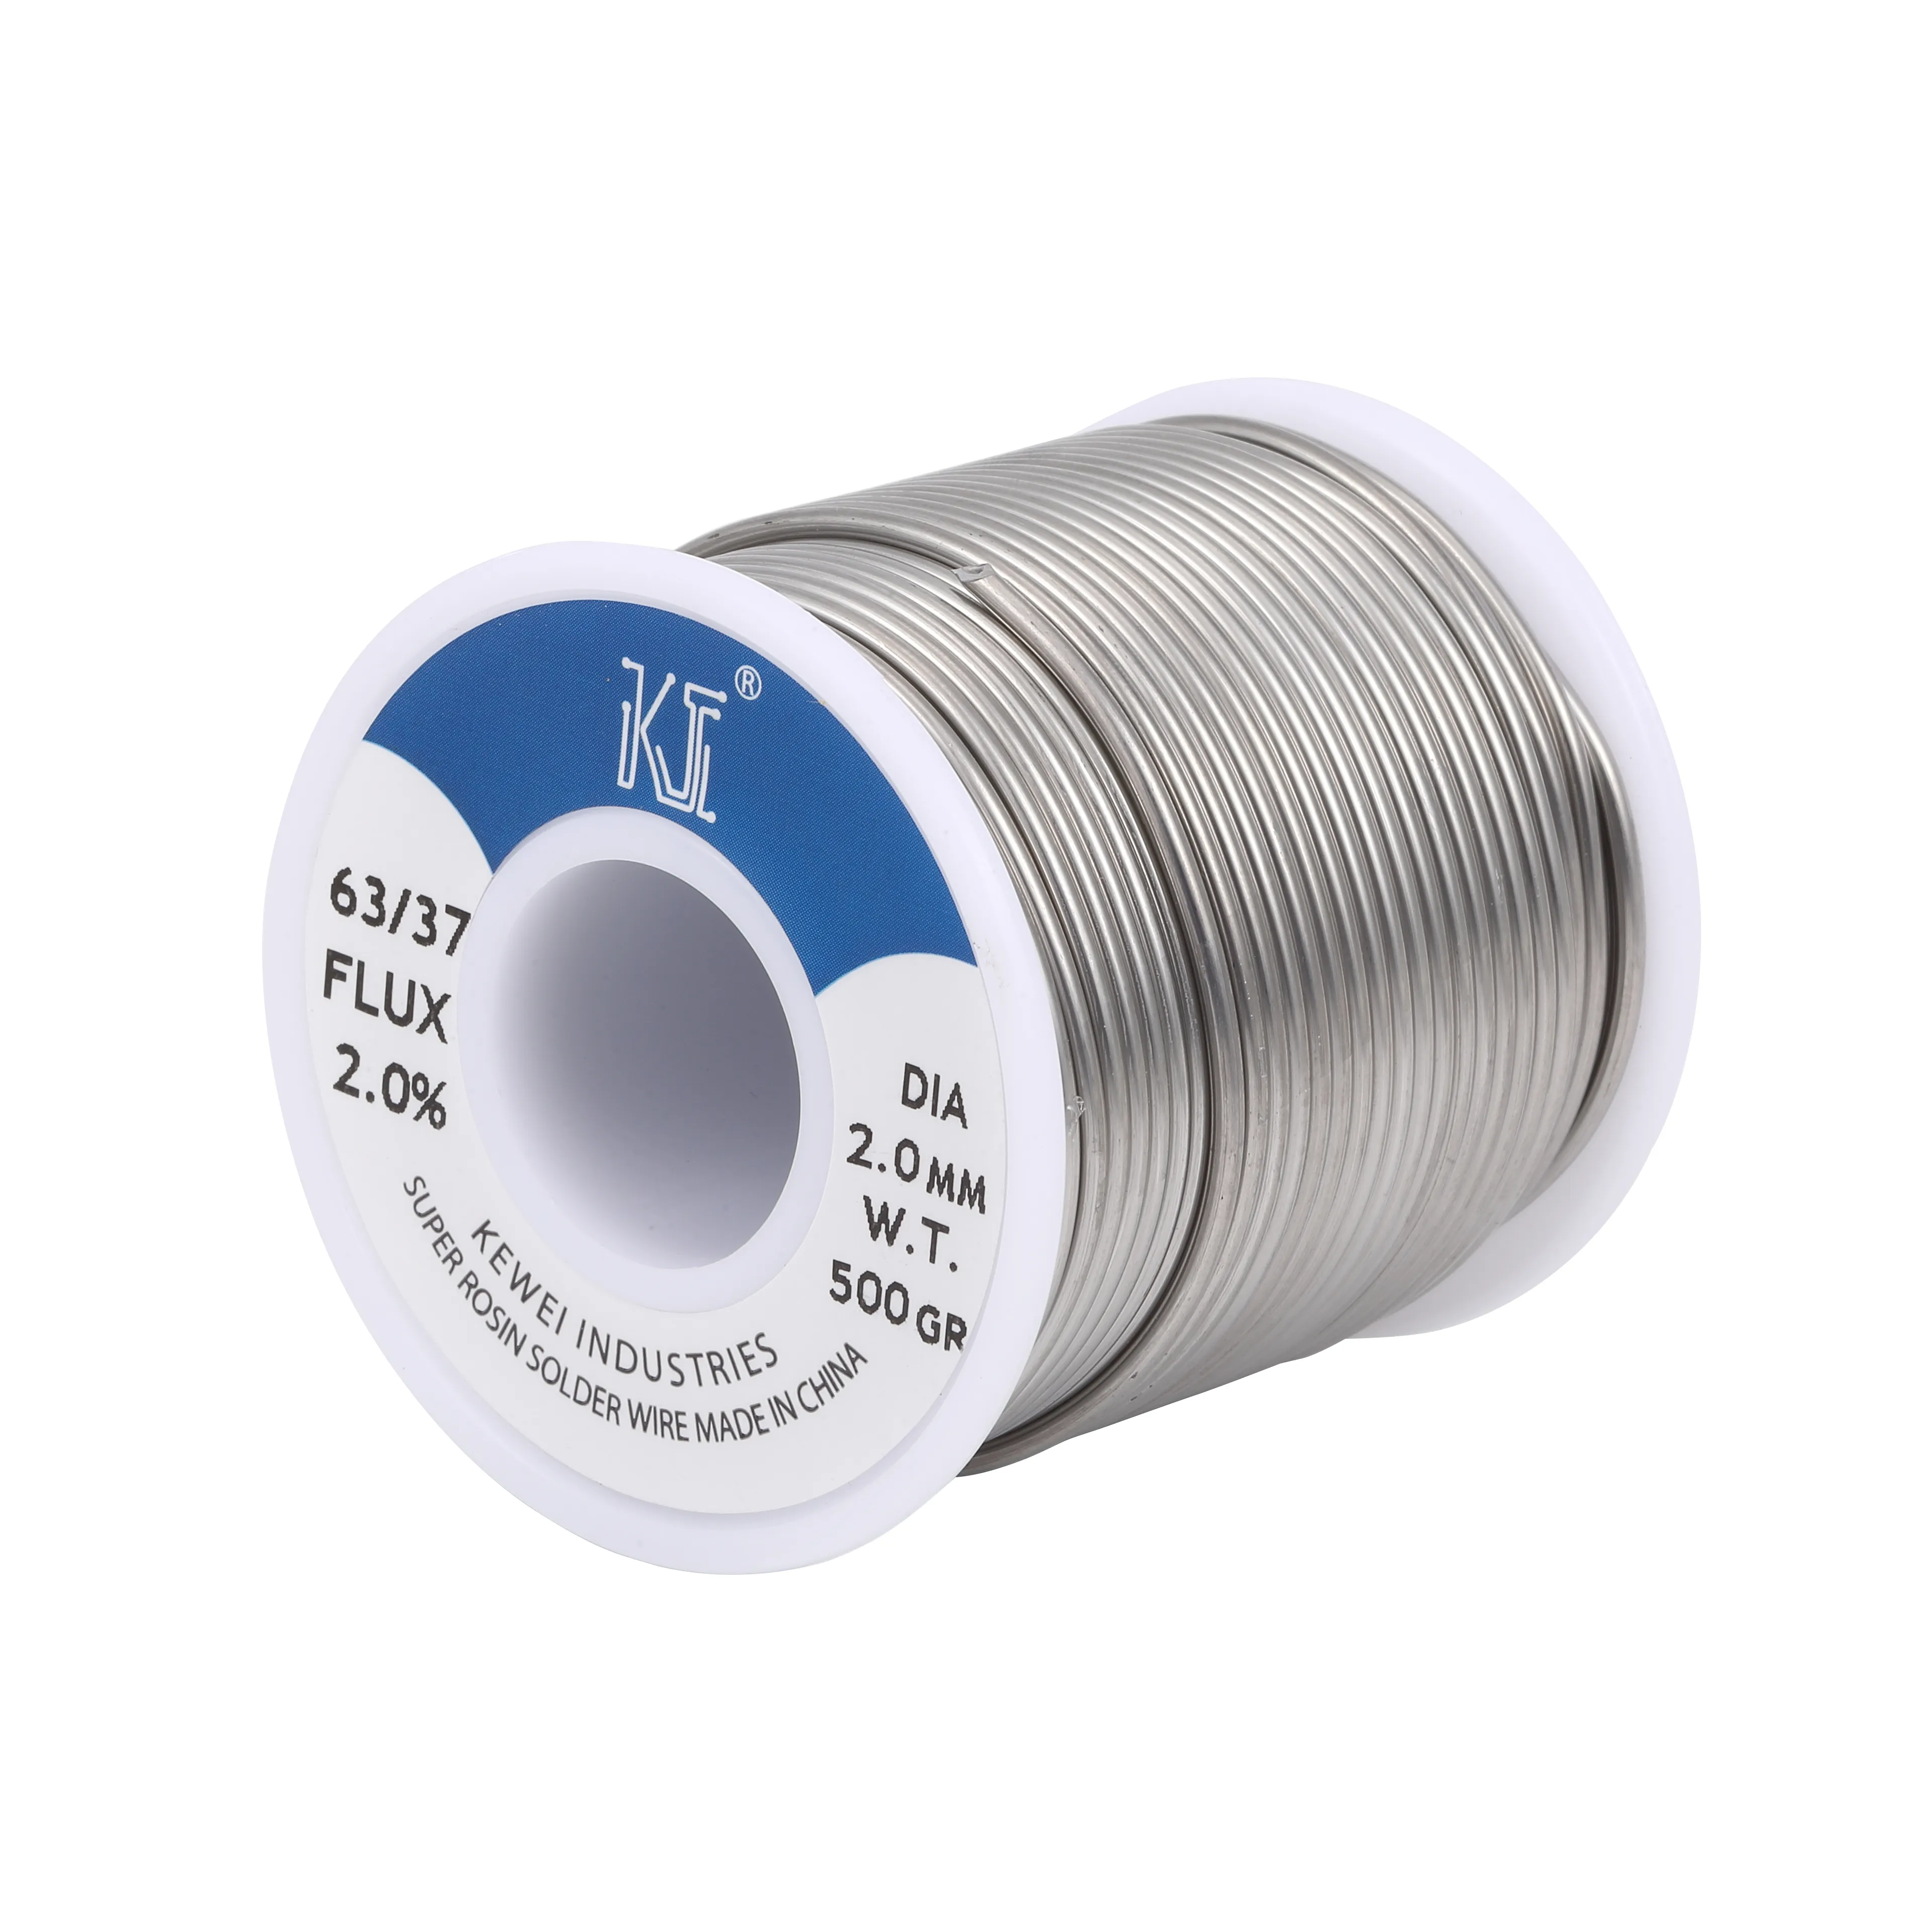 Kewei Tin Lead Alloy 60/40 1000g Solder Wire for Glass Stainless Steel Welding